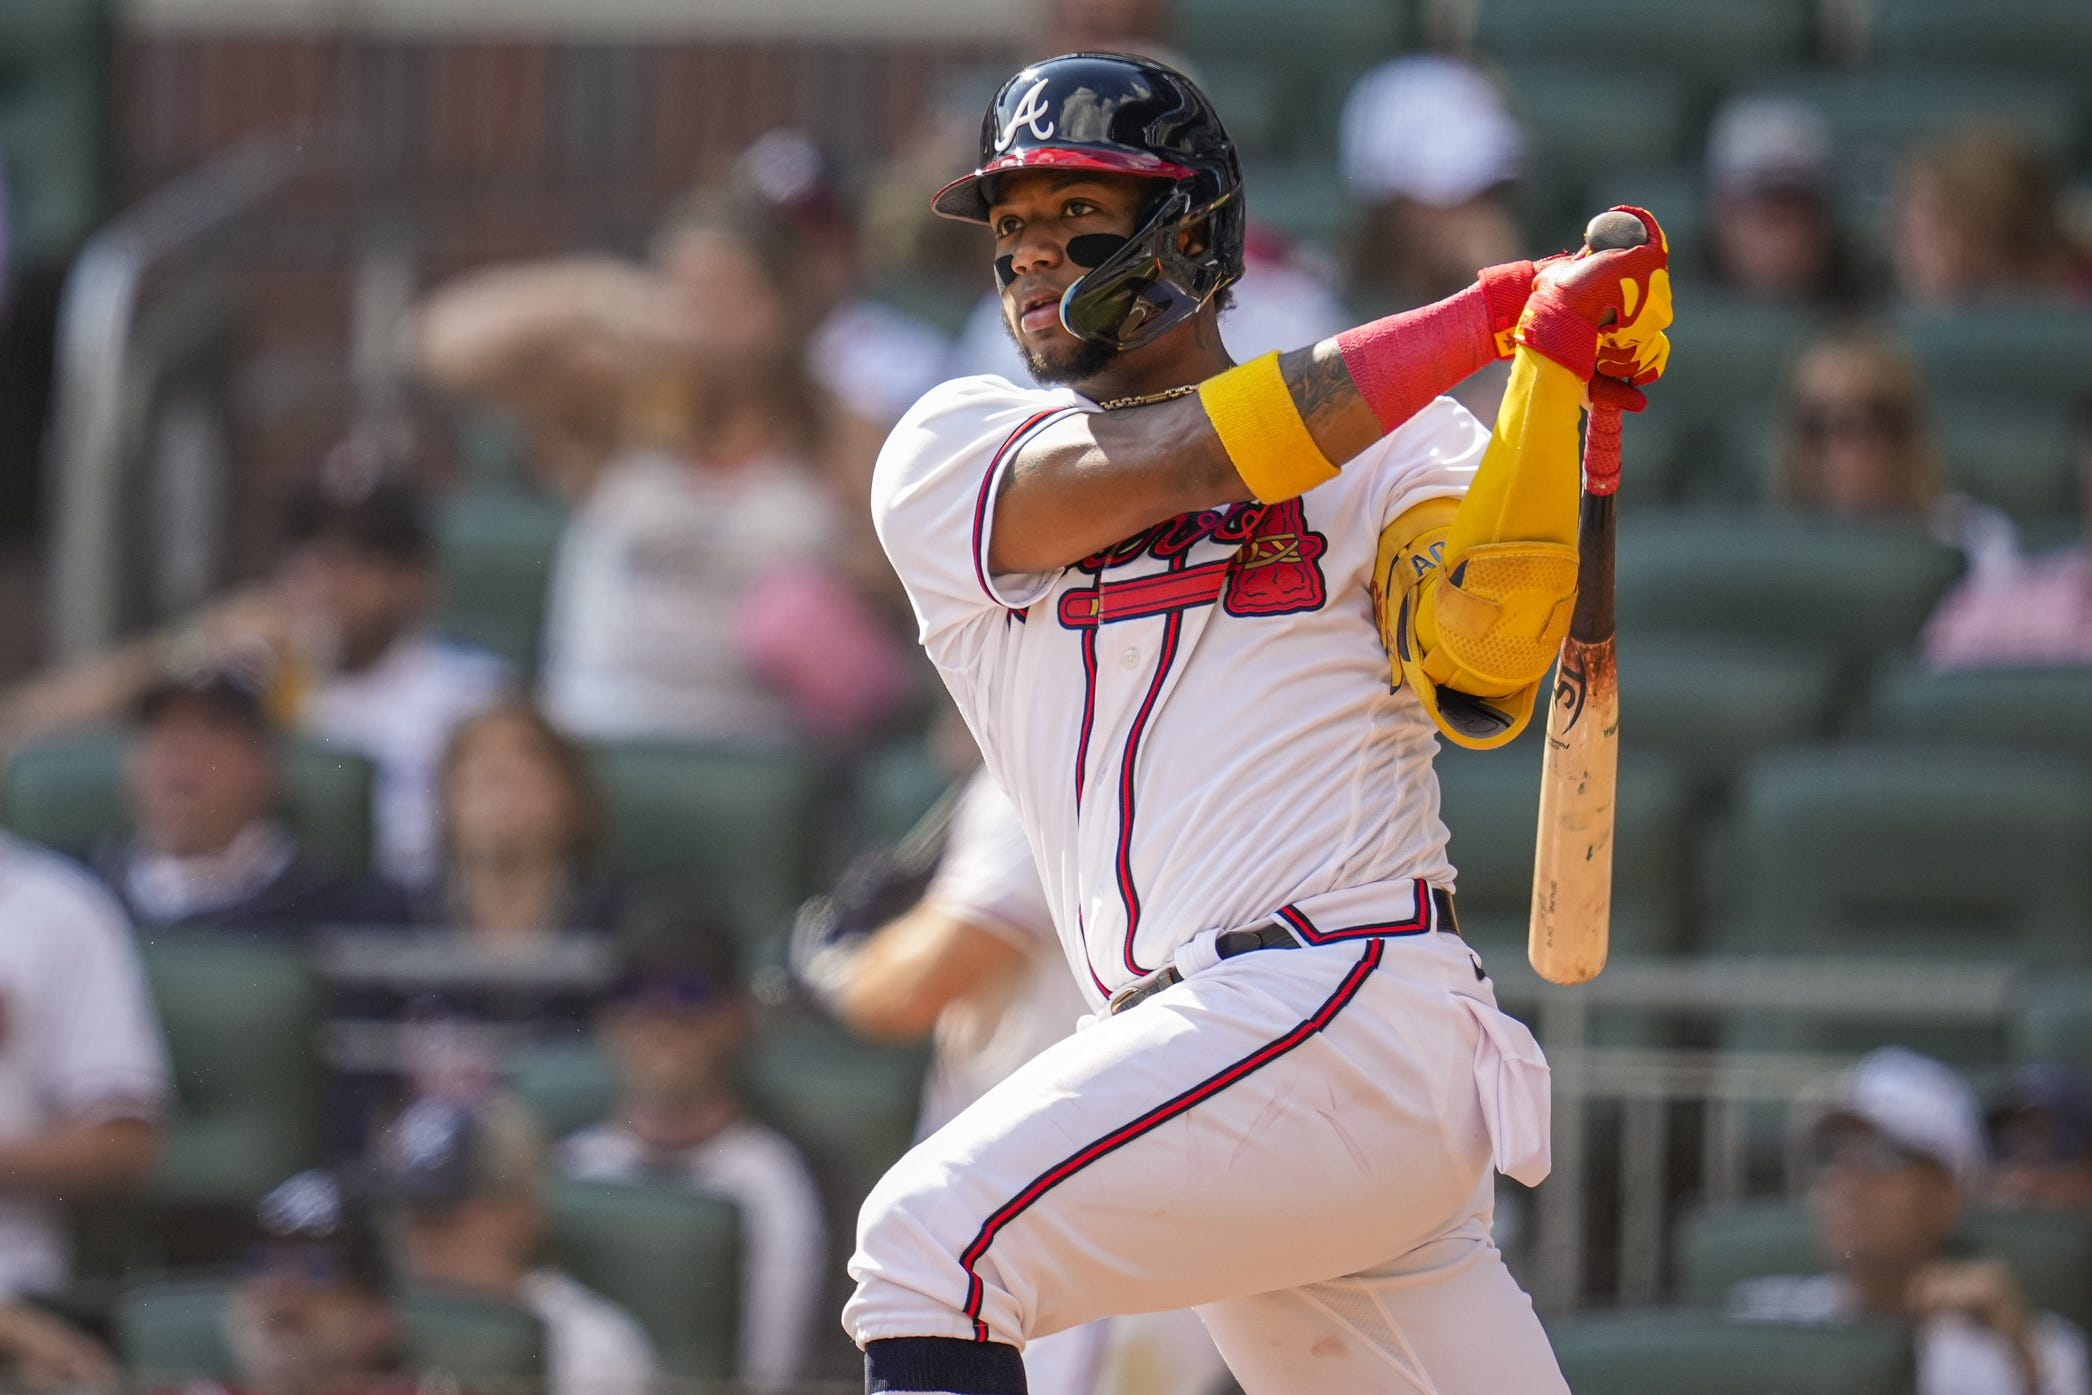 2022 Fantasy Baseball Rankings and Draft Strategy: Deep Top Tier of  Outfielders Features Juan Soto, Mookie Betts, Luis Robert and More